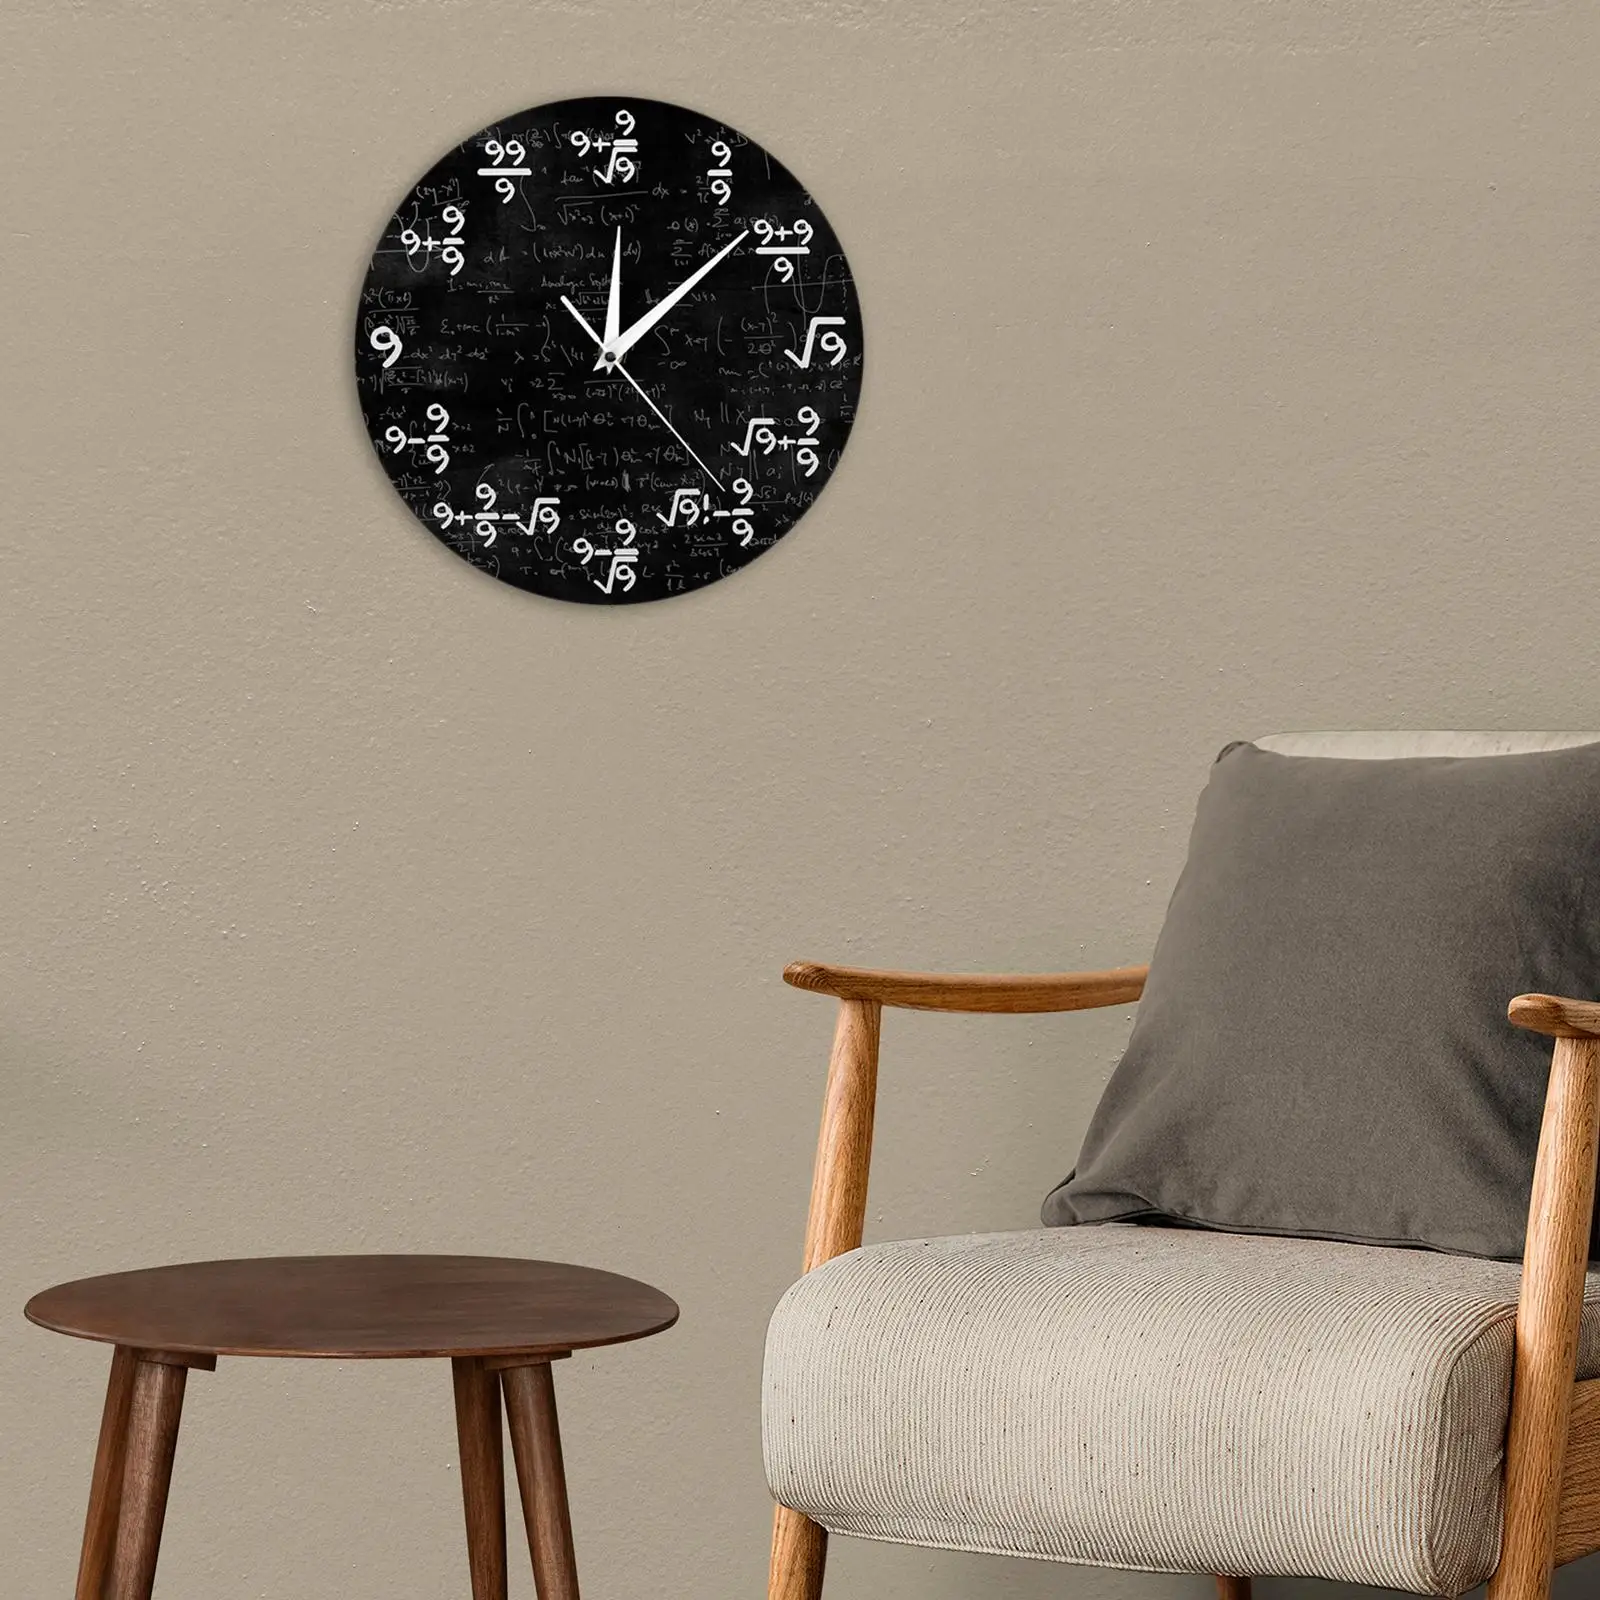 Math Wall Clock,Battery Operated Decorative Wall Clock for Living Room,